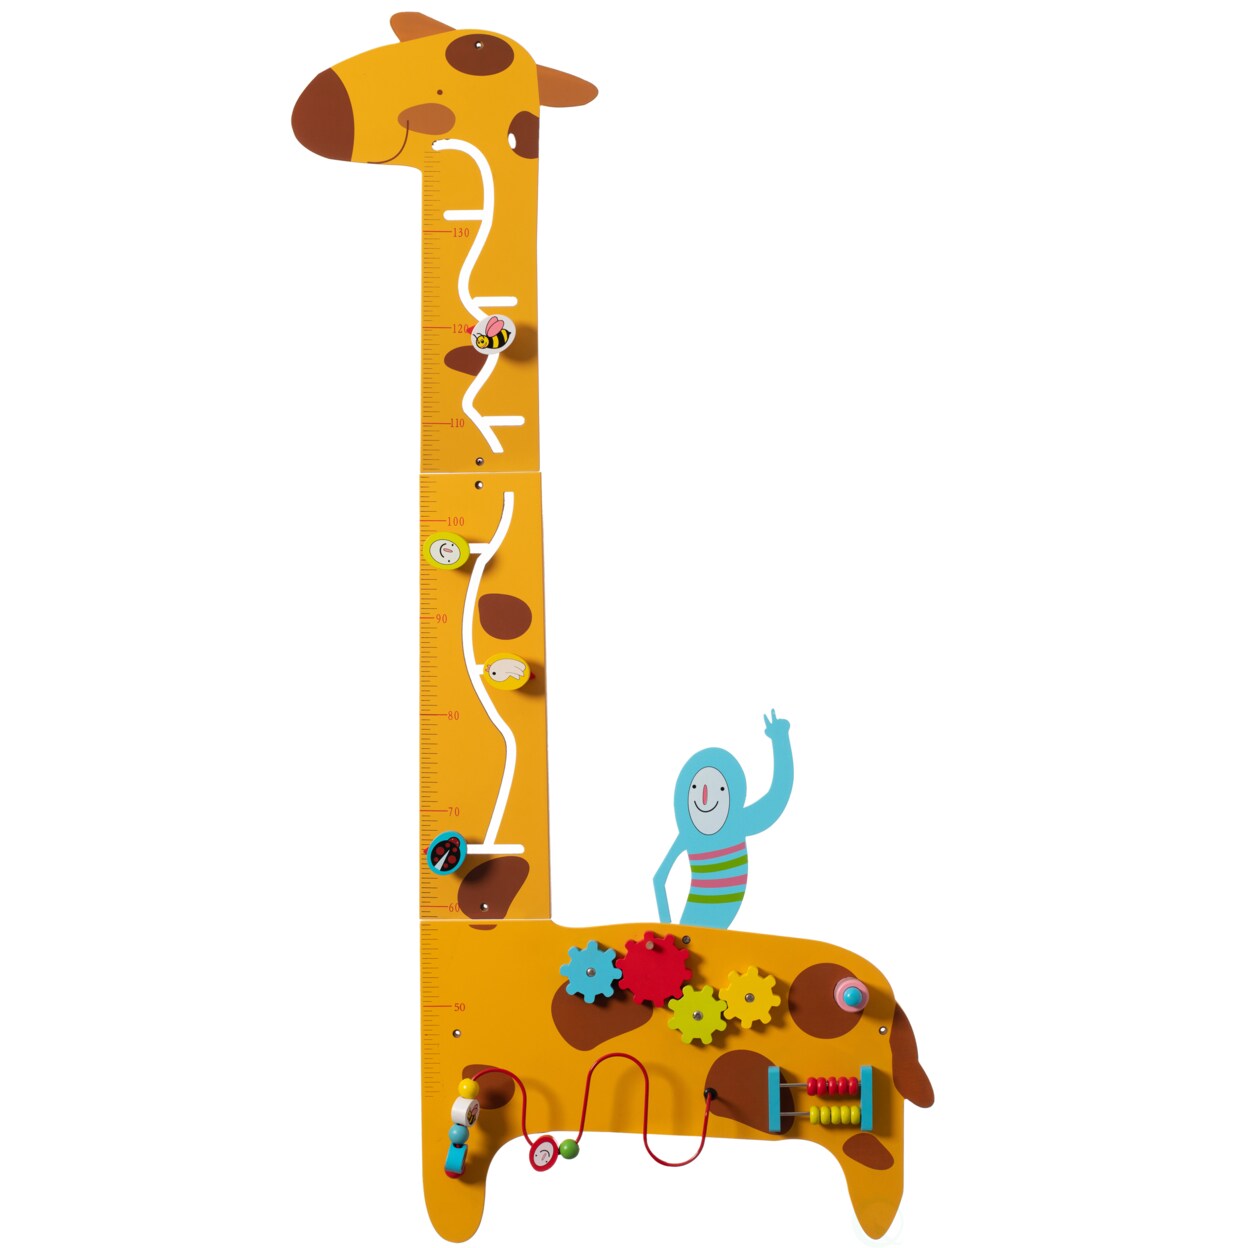 Quickway Imports Wooden Giraffe Sensory Wall Game Activity Toy Growth Chart for Playroom Nursery Preschool and Doctors Office